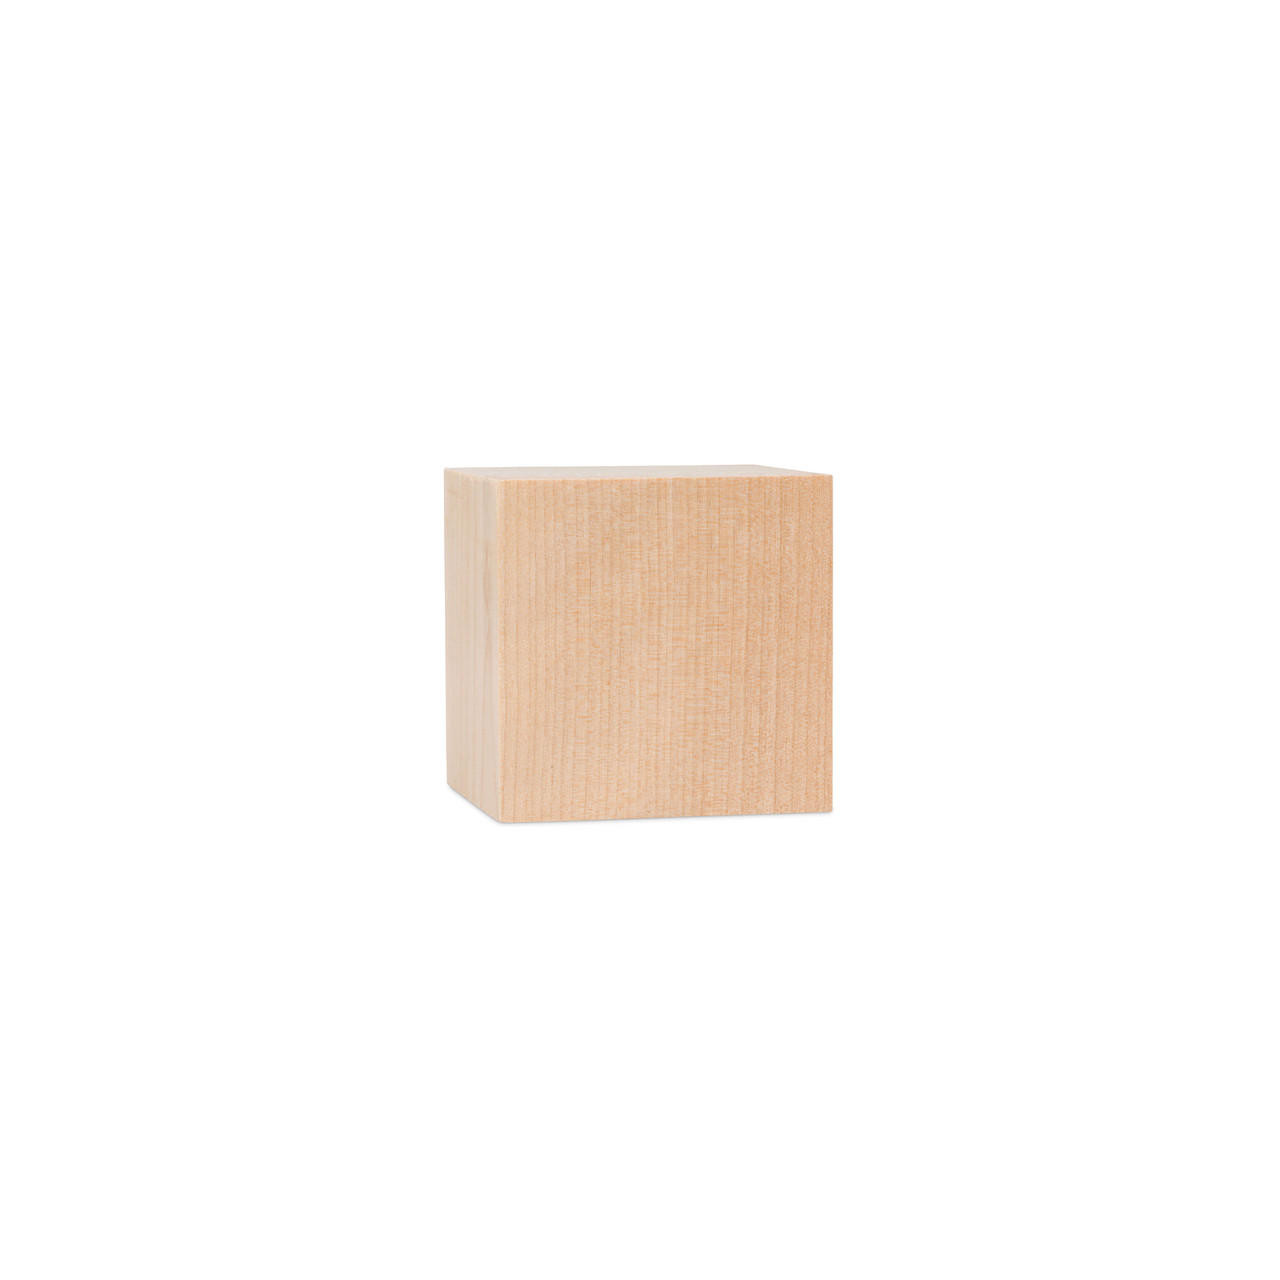 Wooden Blank Dice, Multiple Sizes Available, Unfinished for Games, Party, &  Decor, Woodpeckers